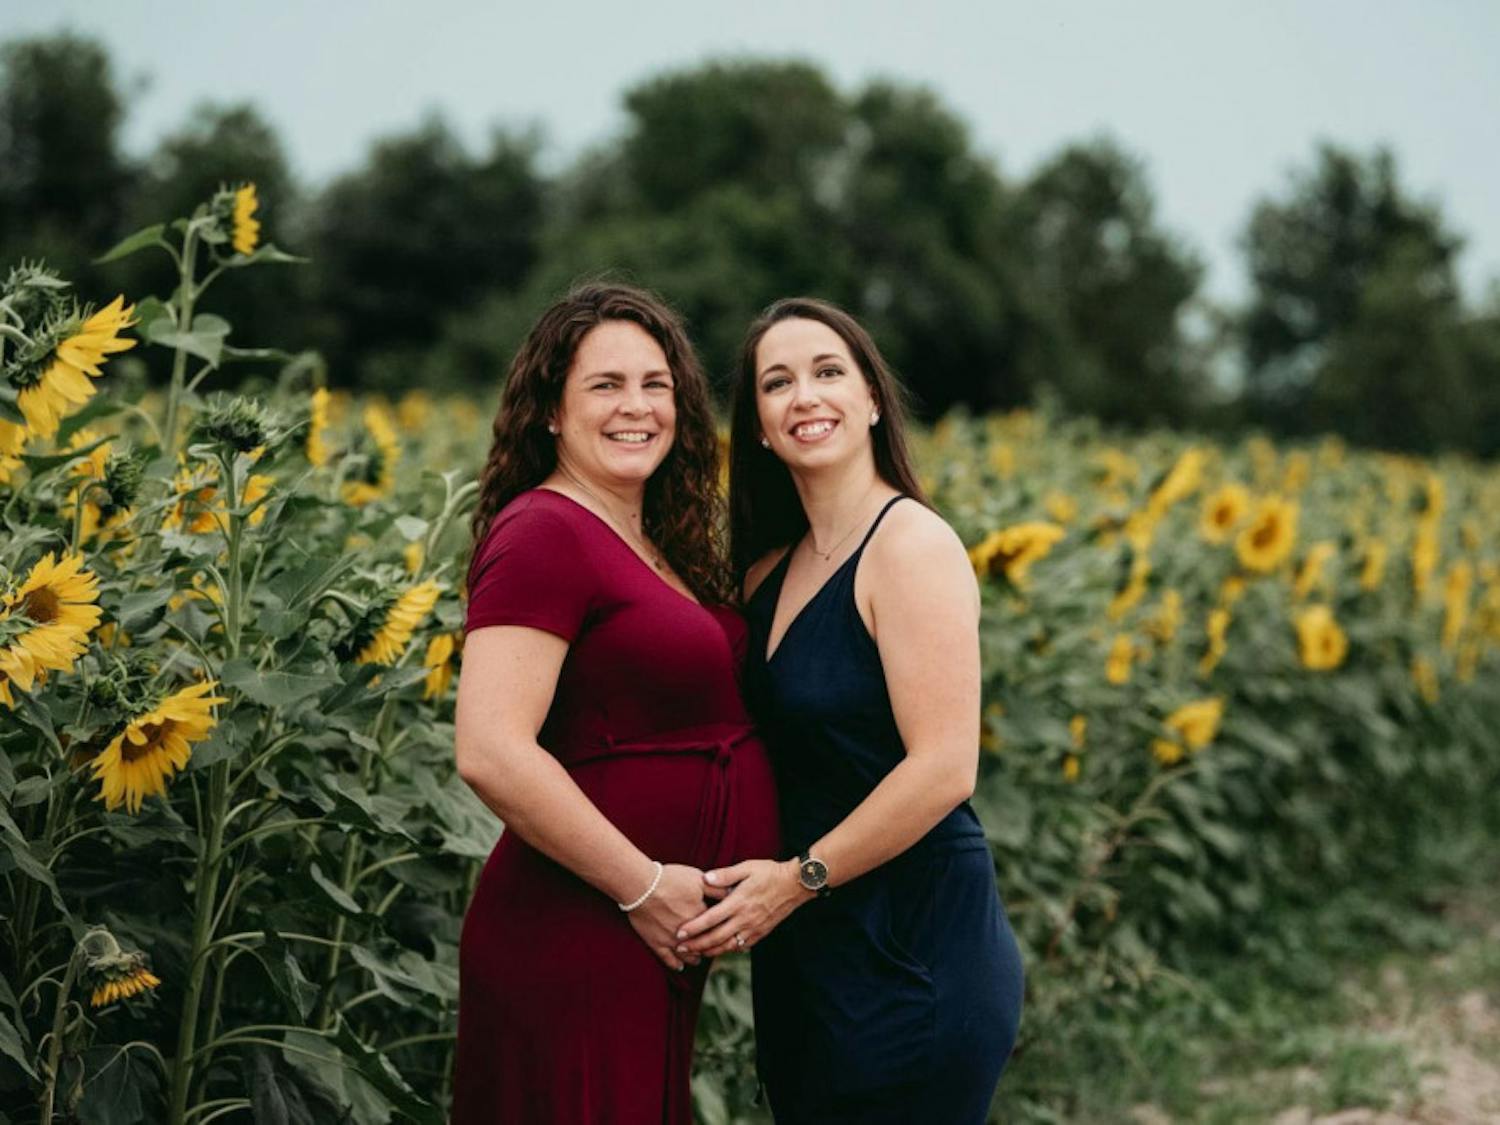 Adrianna and Ashley Tousignant celebrate their pregnancy in a field of sunflowers. Their baby boy was born June 19.&nbsp;